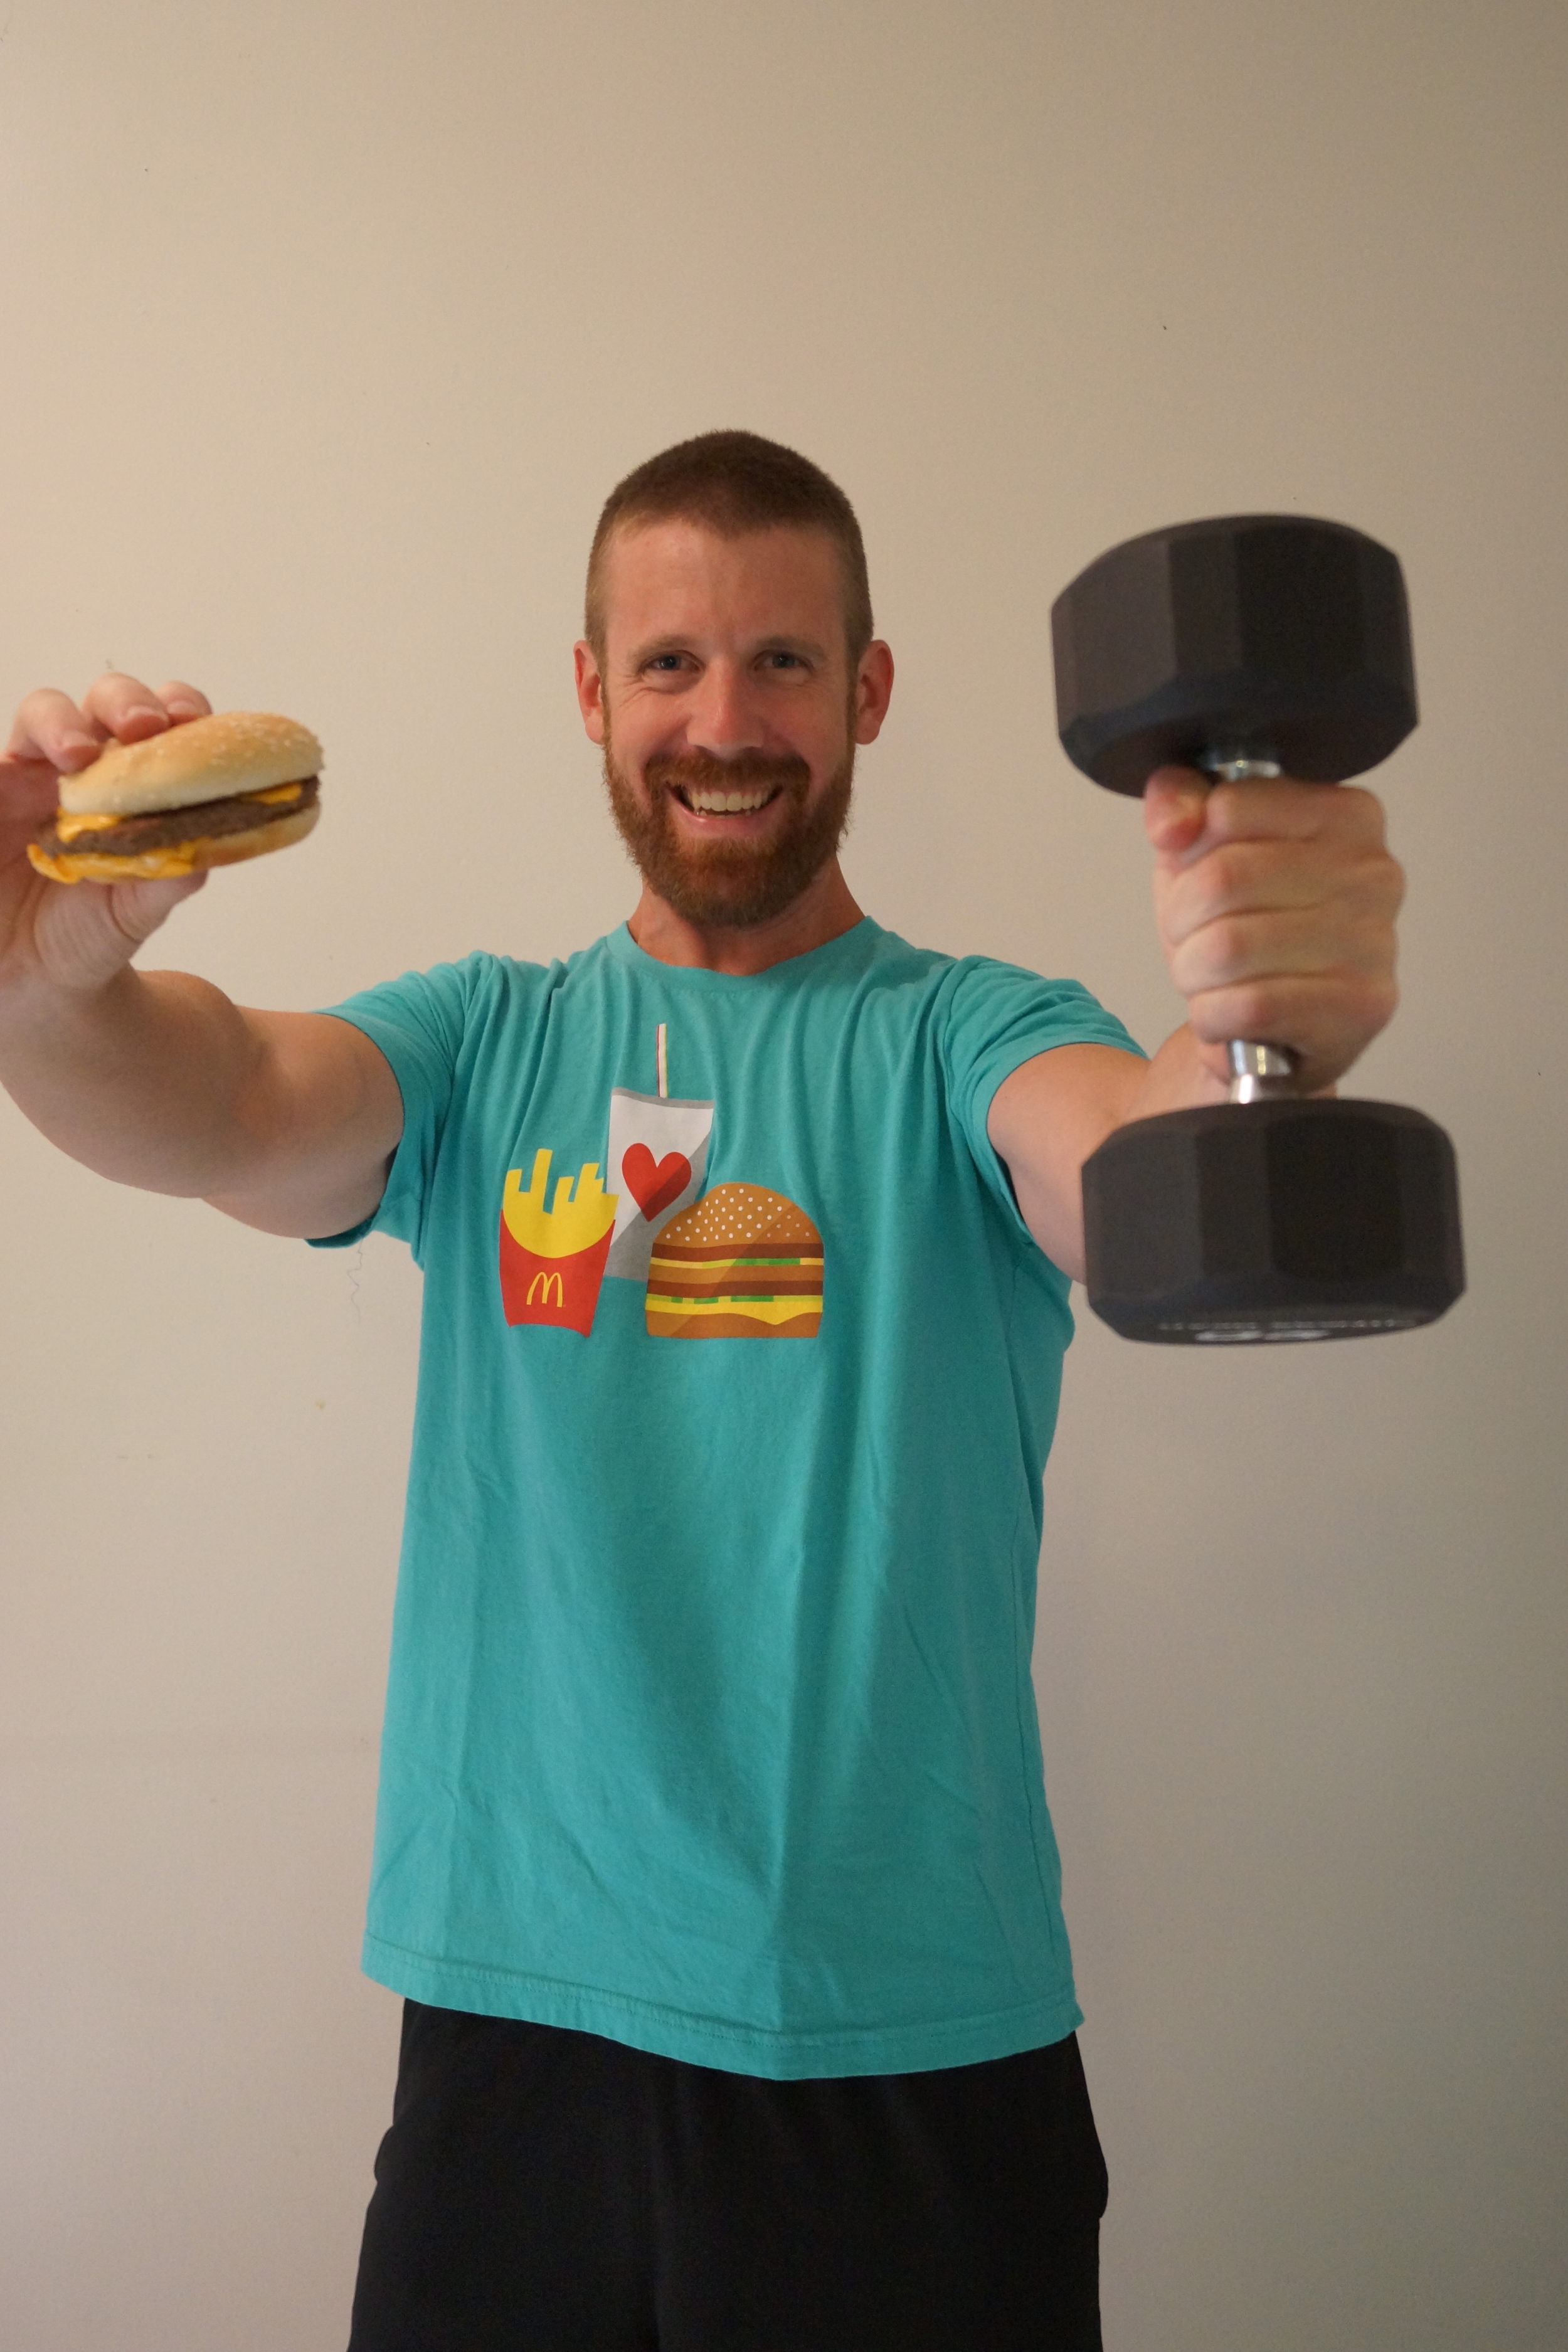 McDonald's Happy Meal Cheeseburger and Weights